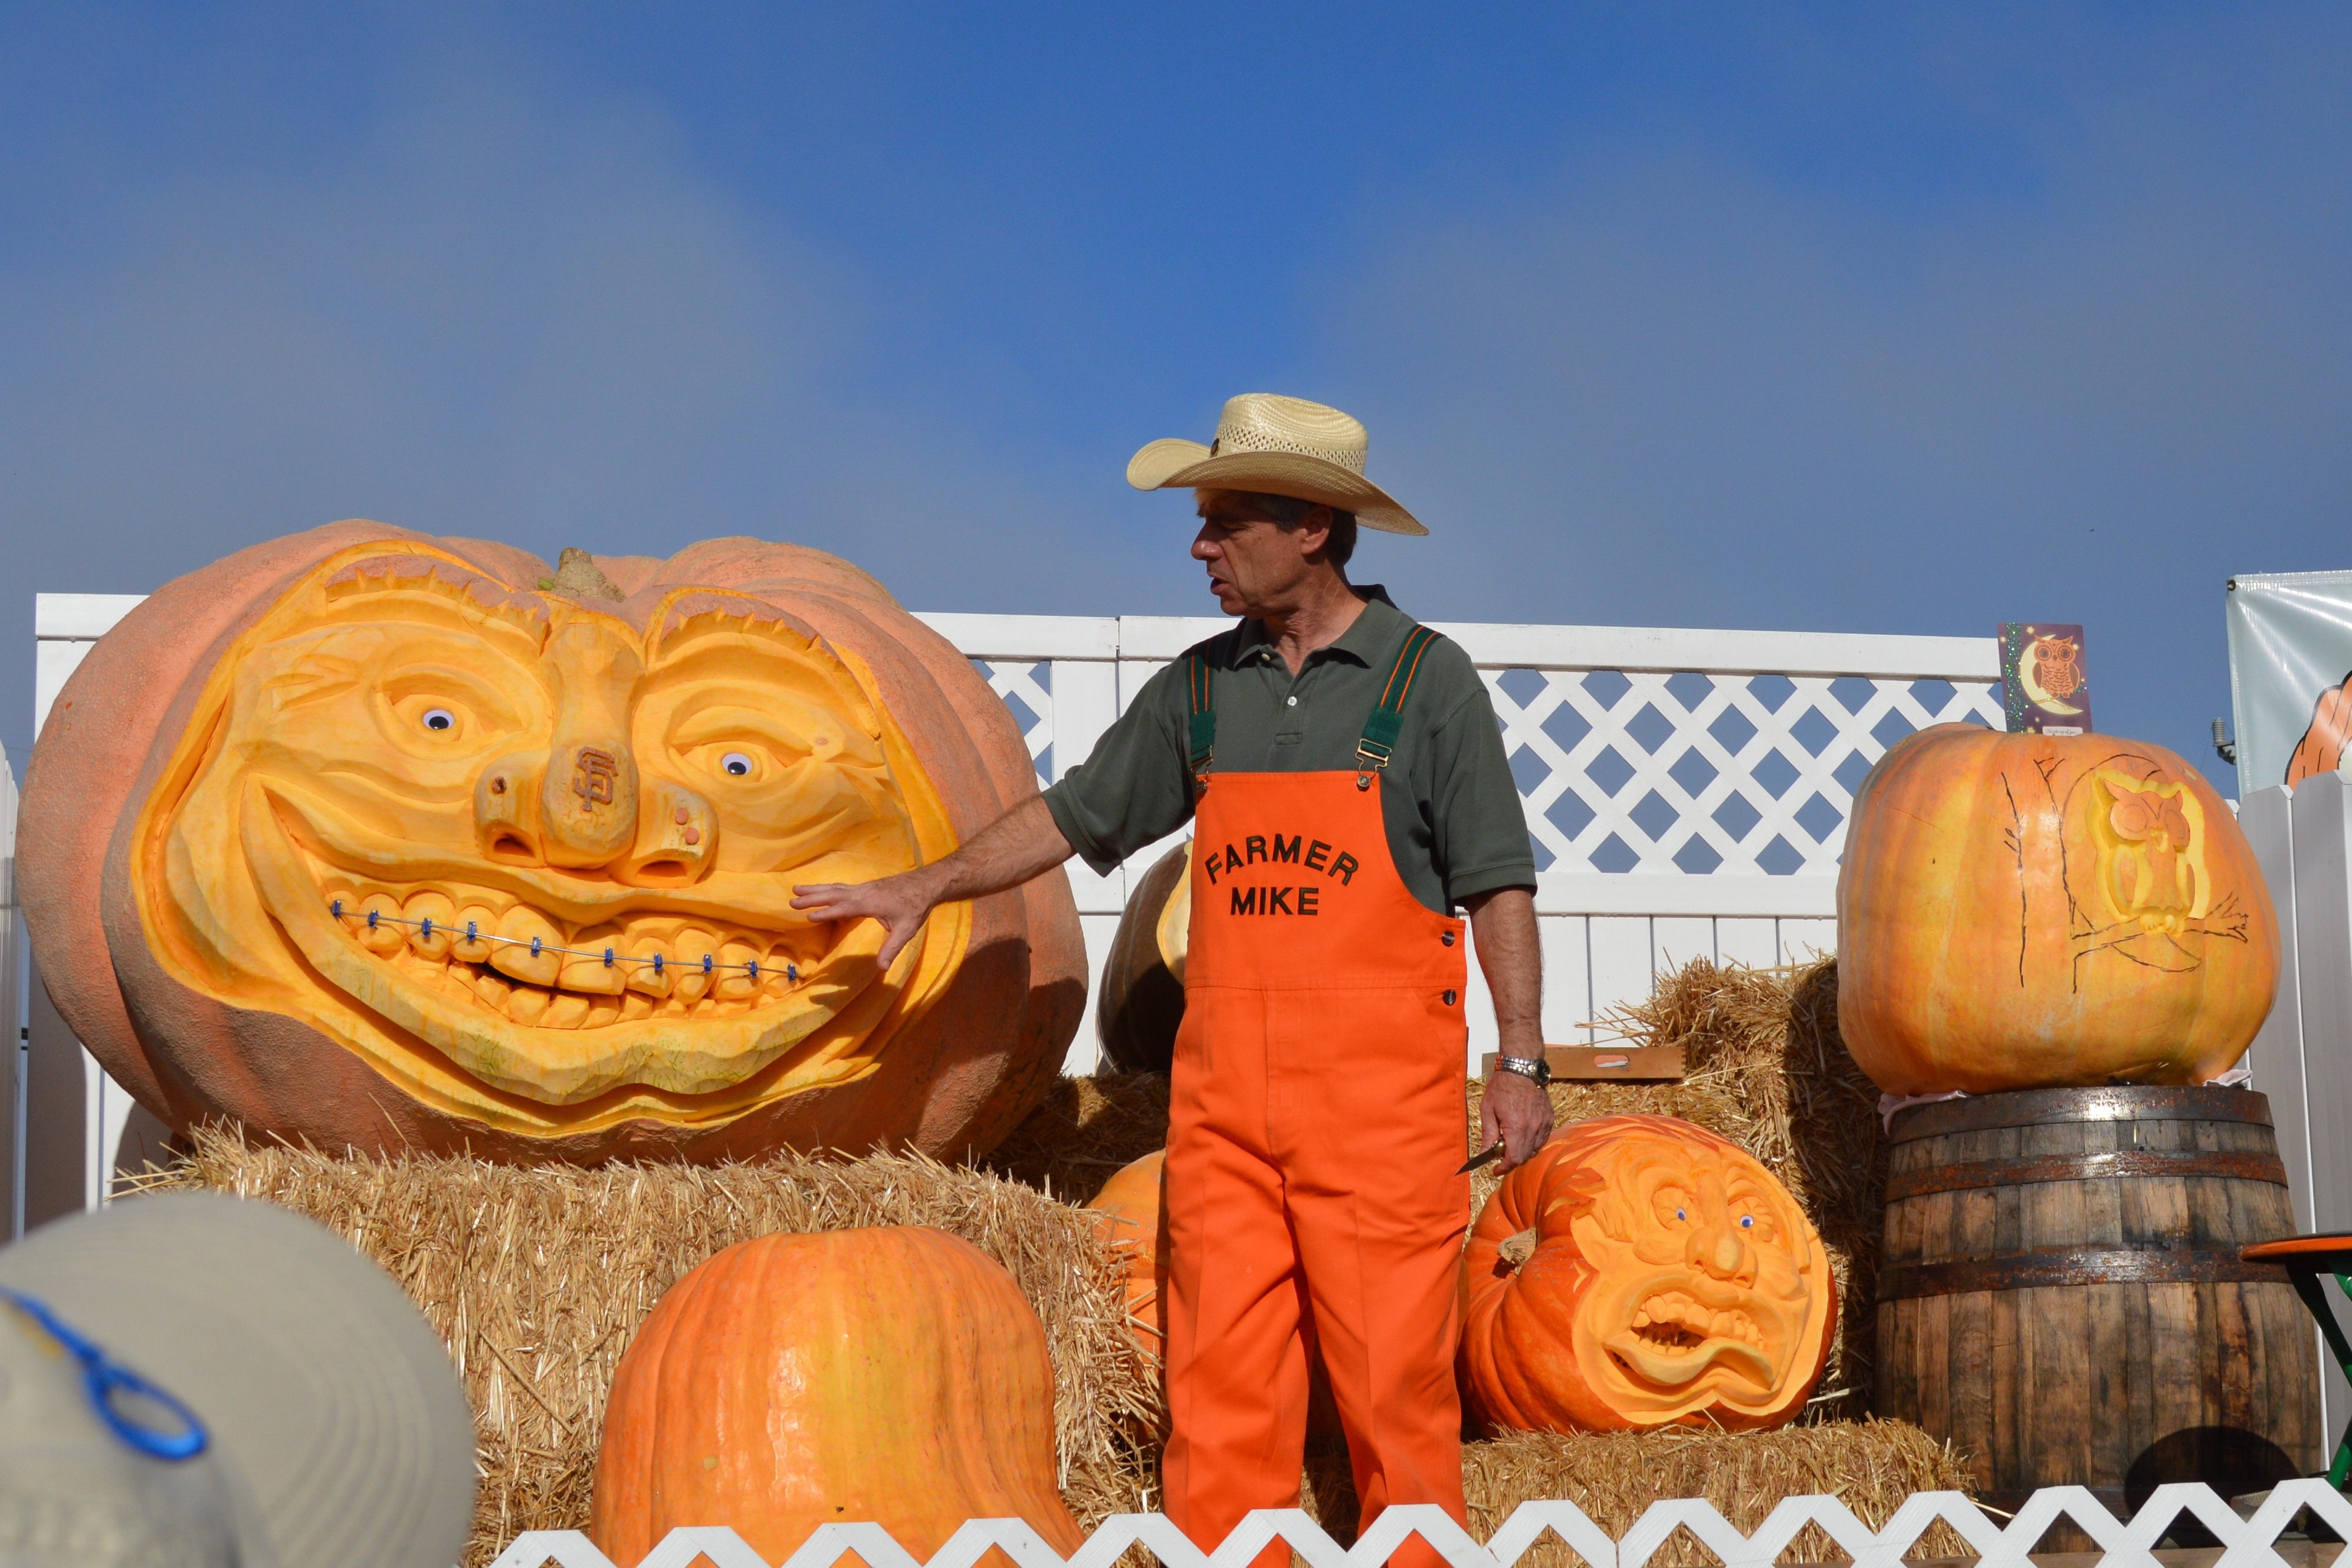 Half Moon Bay Pumpkin Festival, pictured from top: Farmer Mike and his famo...